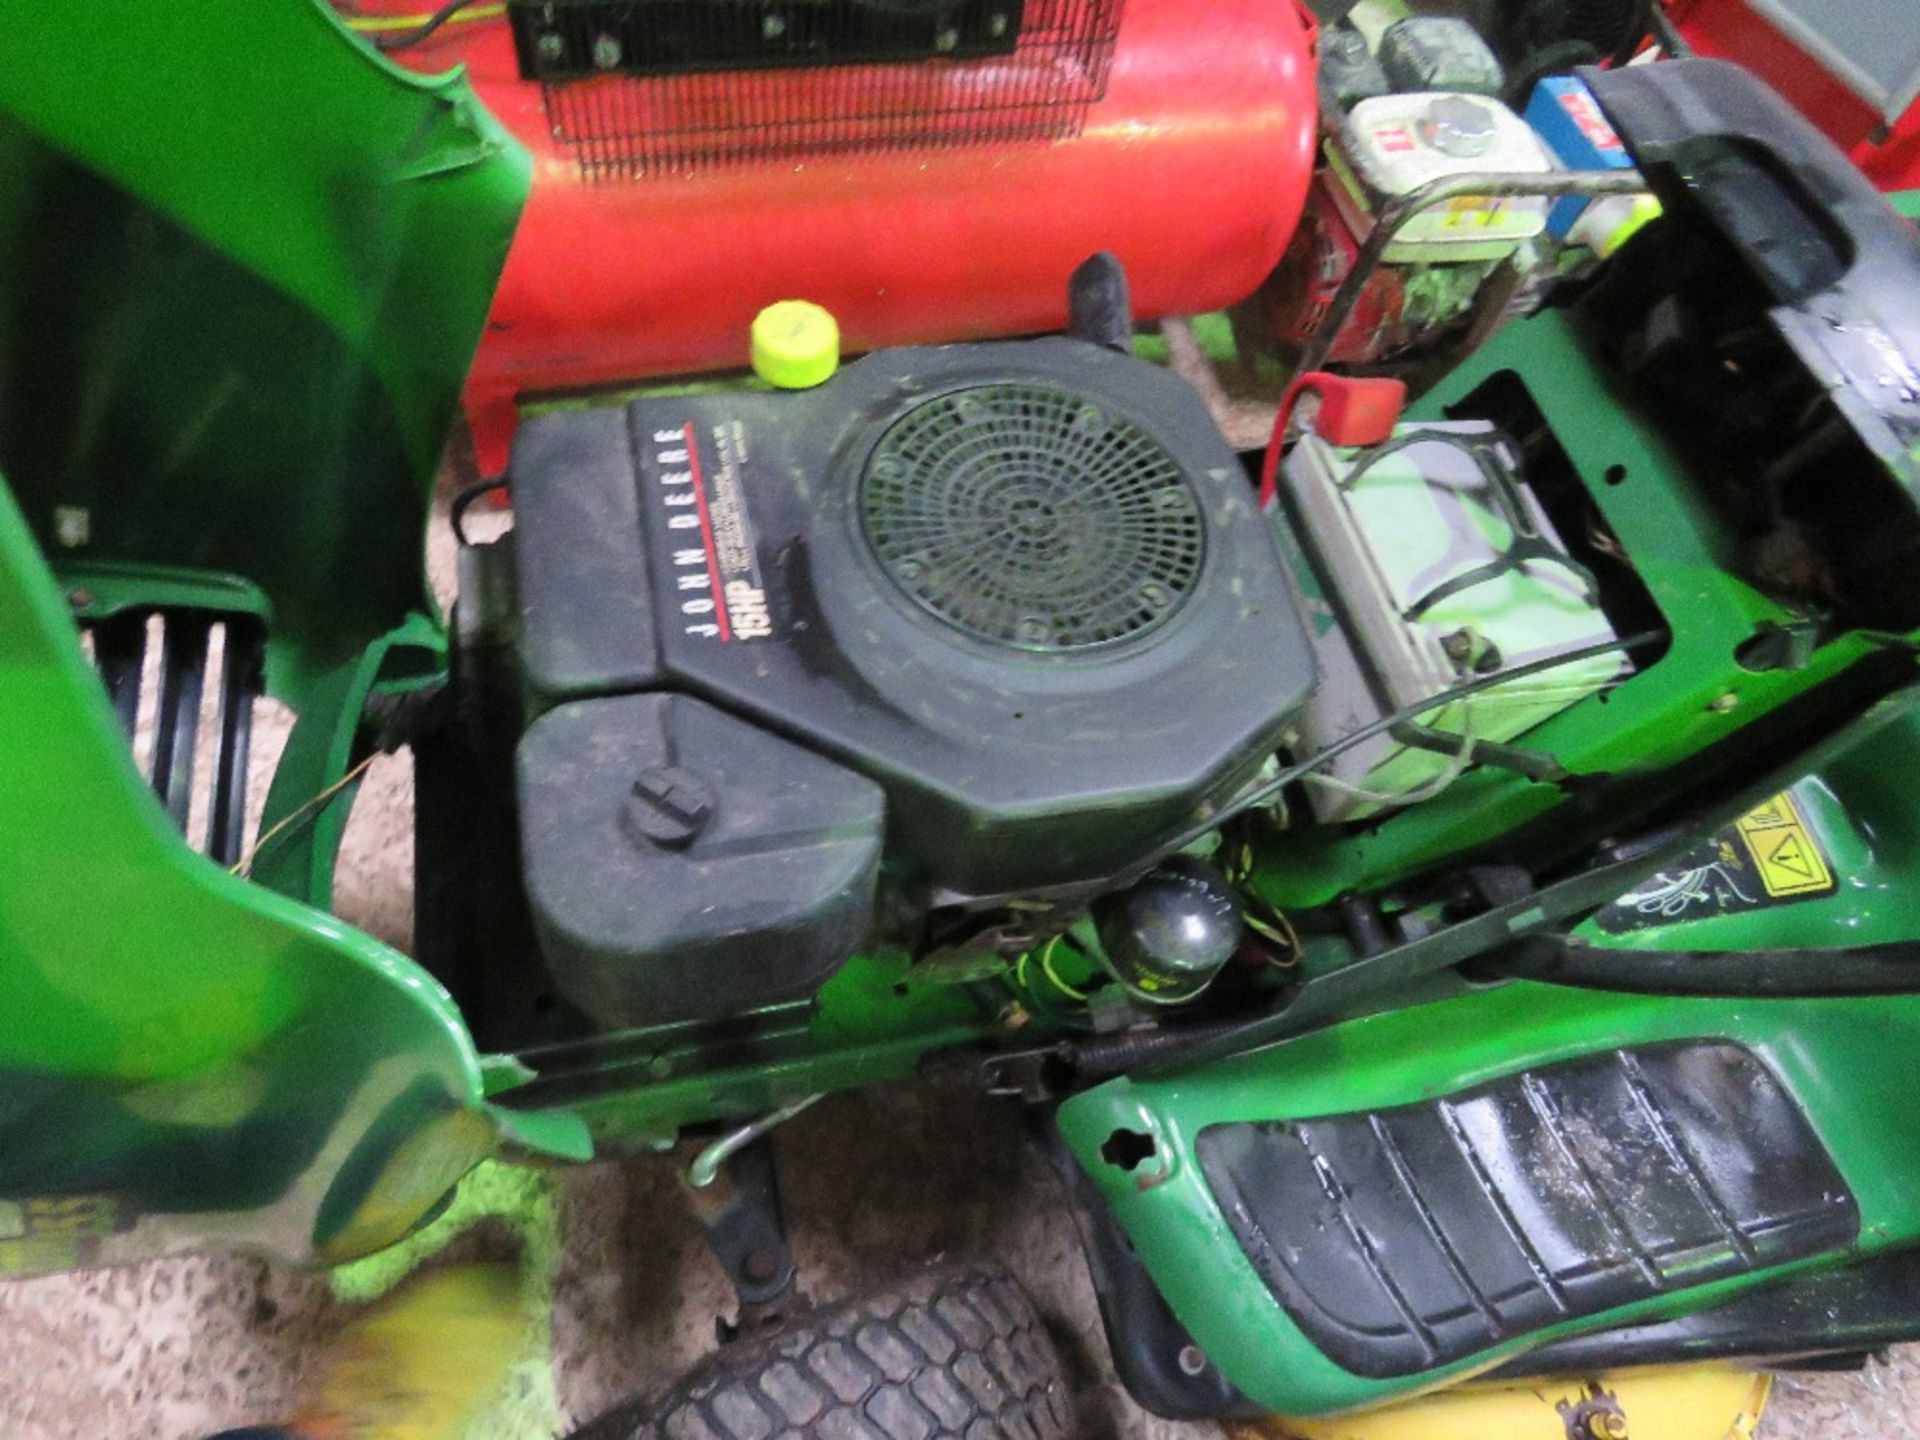 JOHN DEERE LTR155 RIDE ON LAWNMOWER. WHEN TESTED WAS SEEN TO RUN, DRIVE AND MOWER ENGAGED. ....THIS - Image 3 of 6